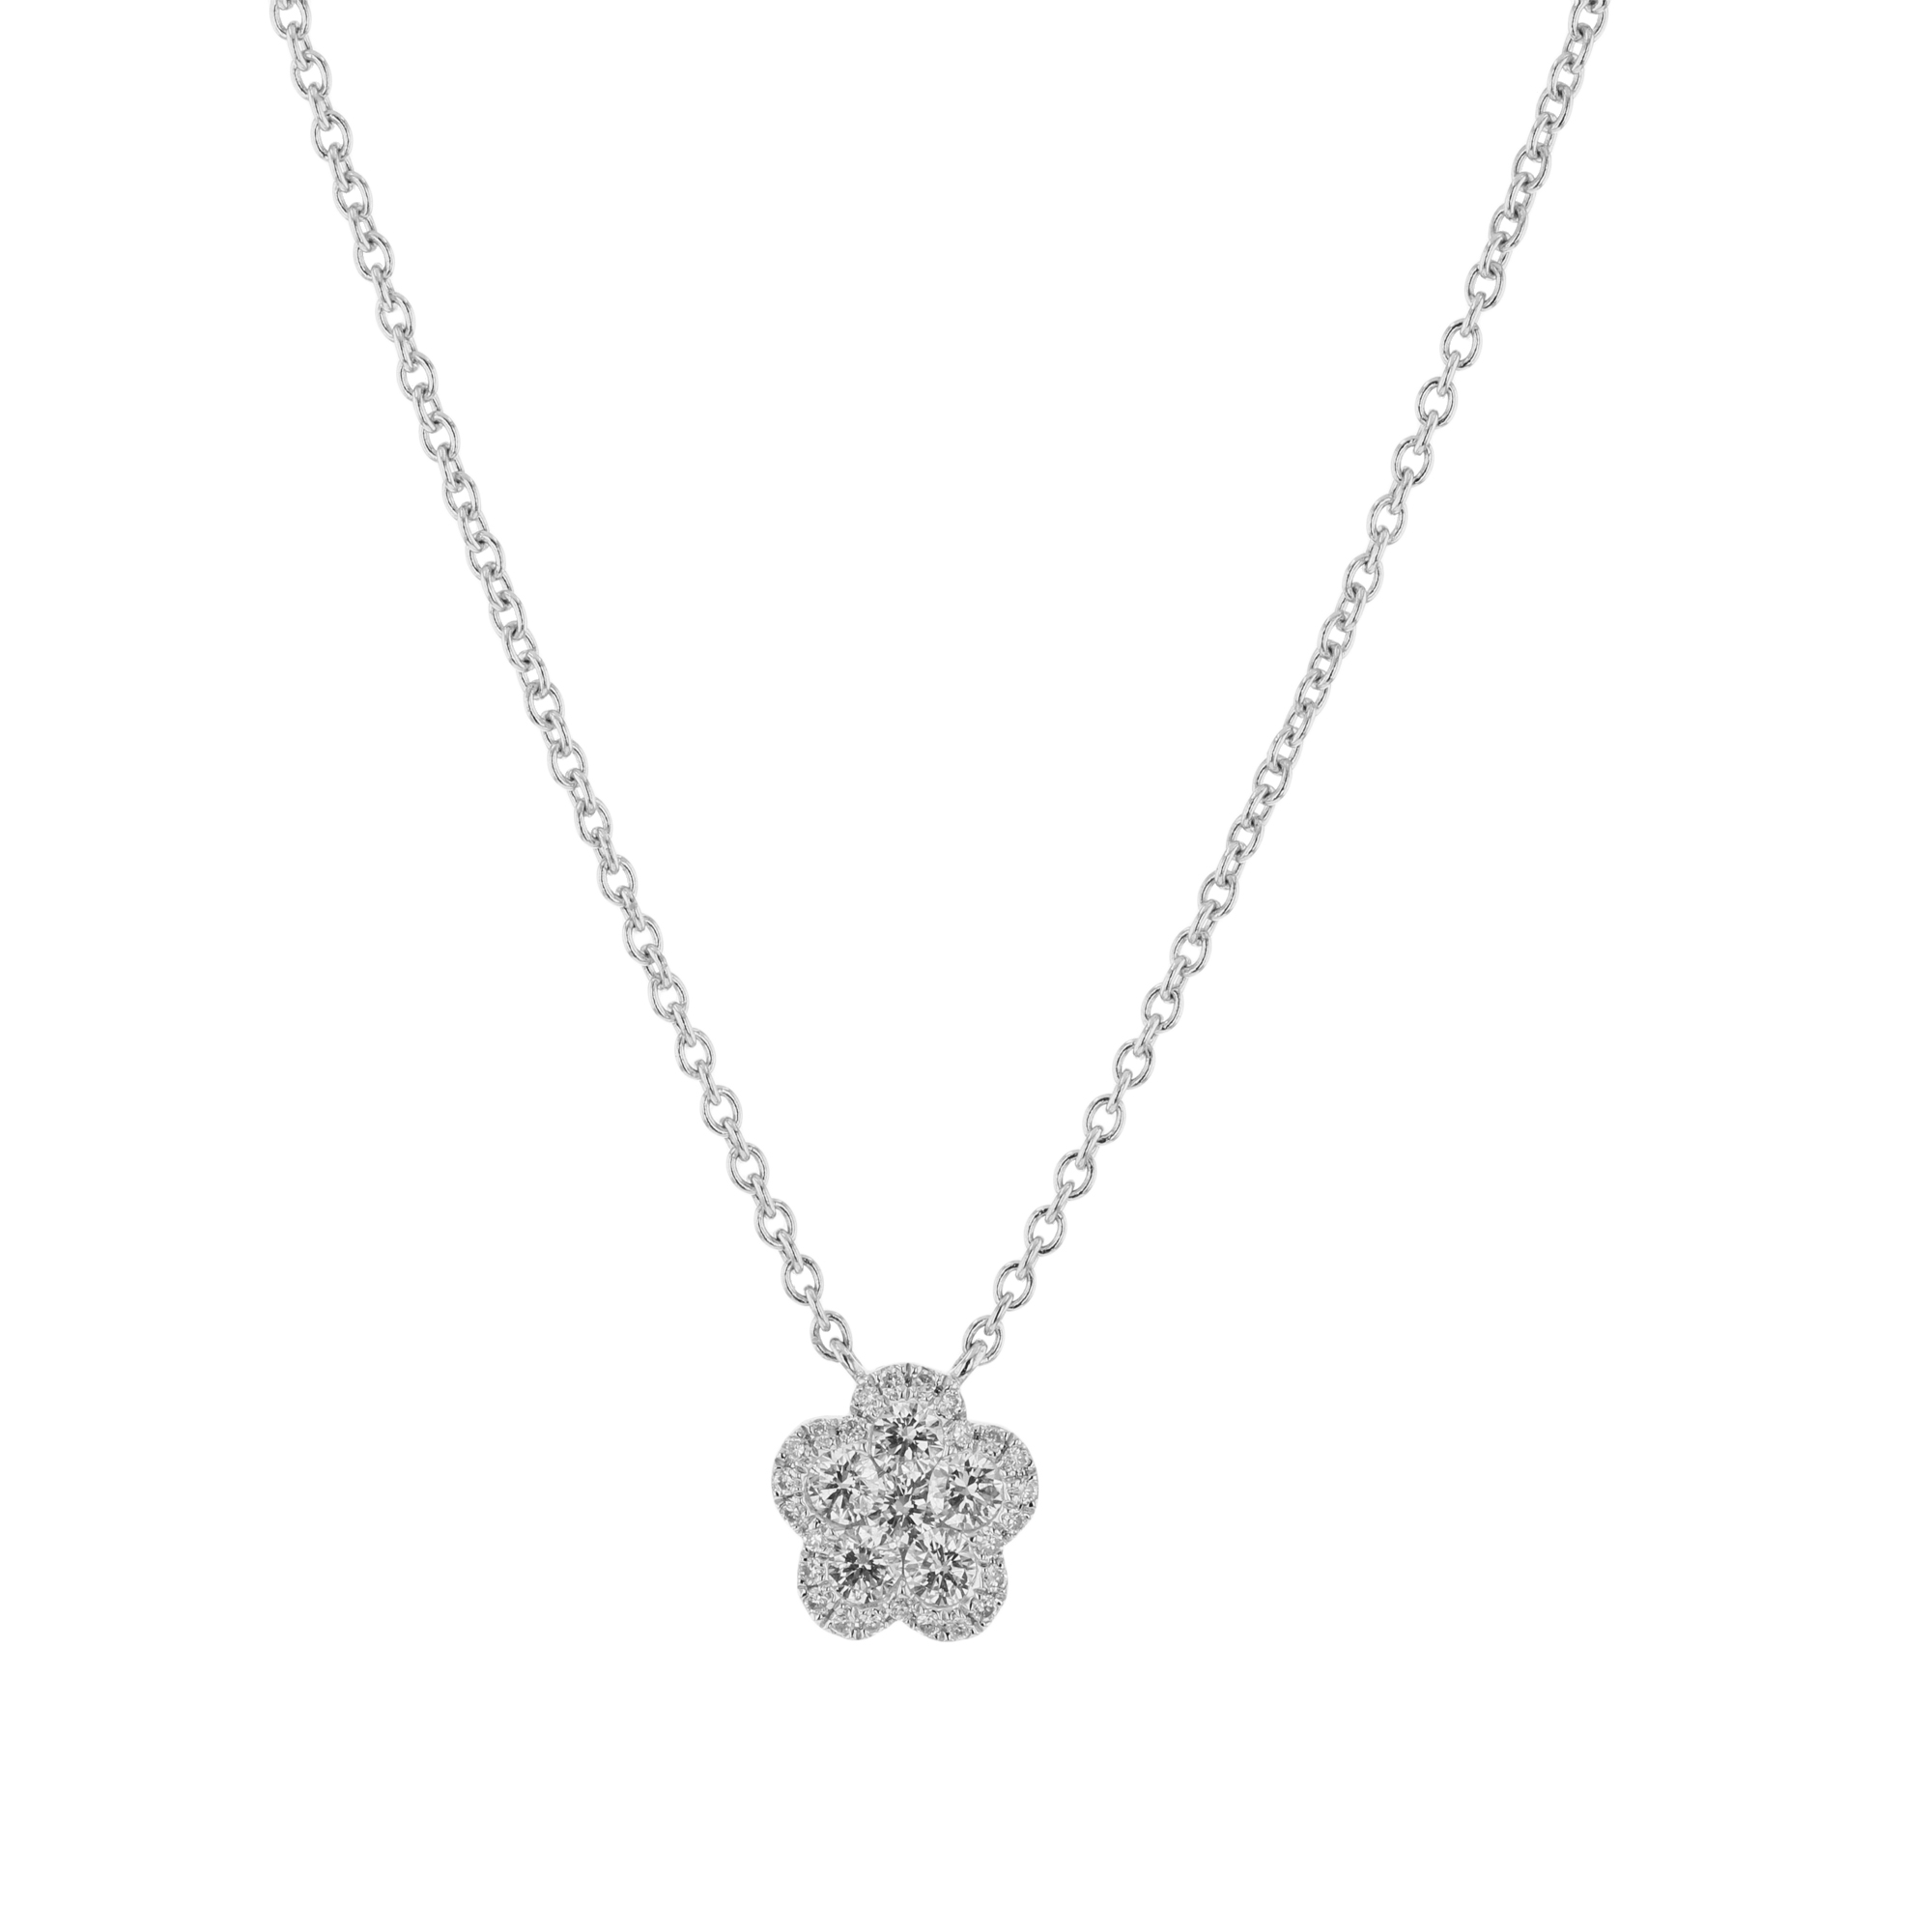 View 0.42ctw Diamond Floral Cluster Pendant in 18k White Gold